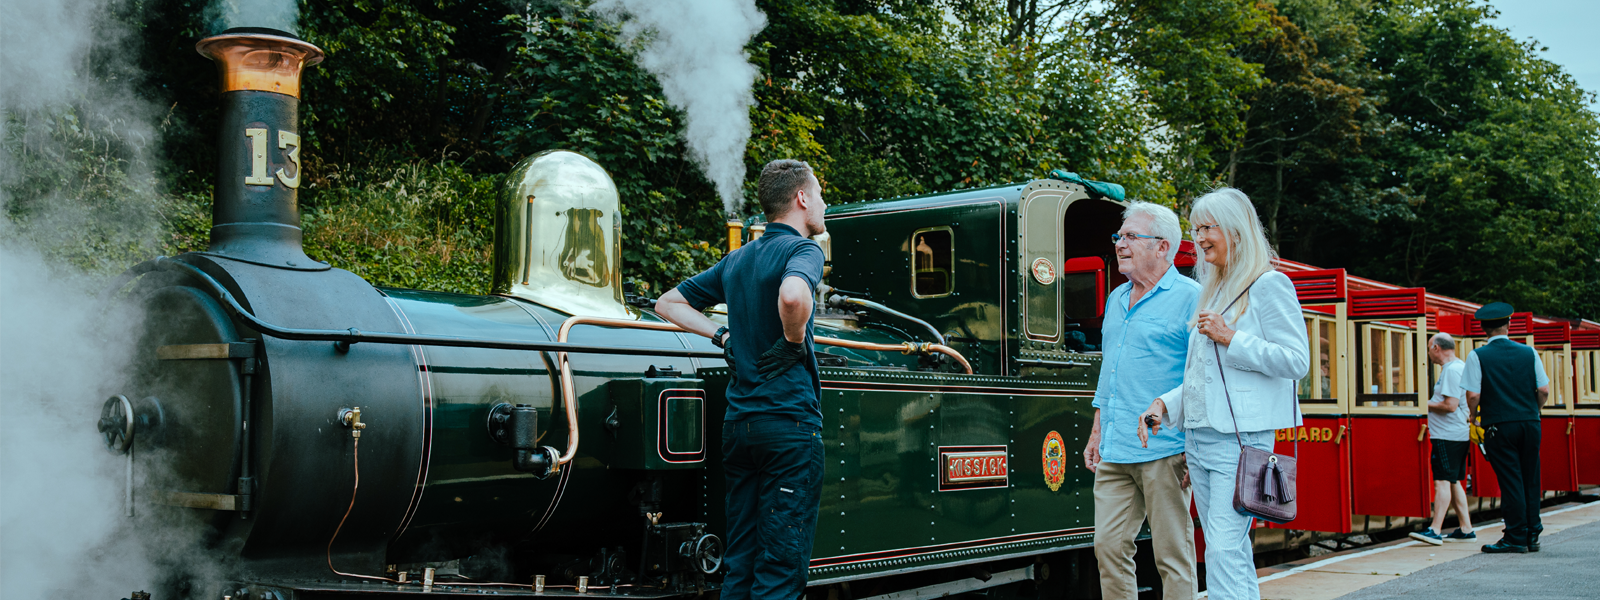 A couple standing next to the Steam Railway on the Isle of Man talking to the Railway driver